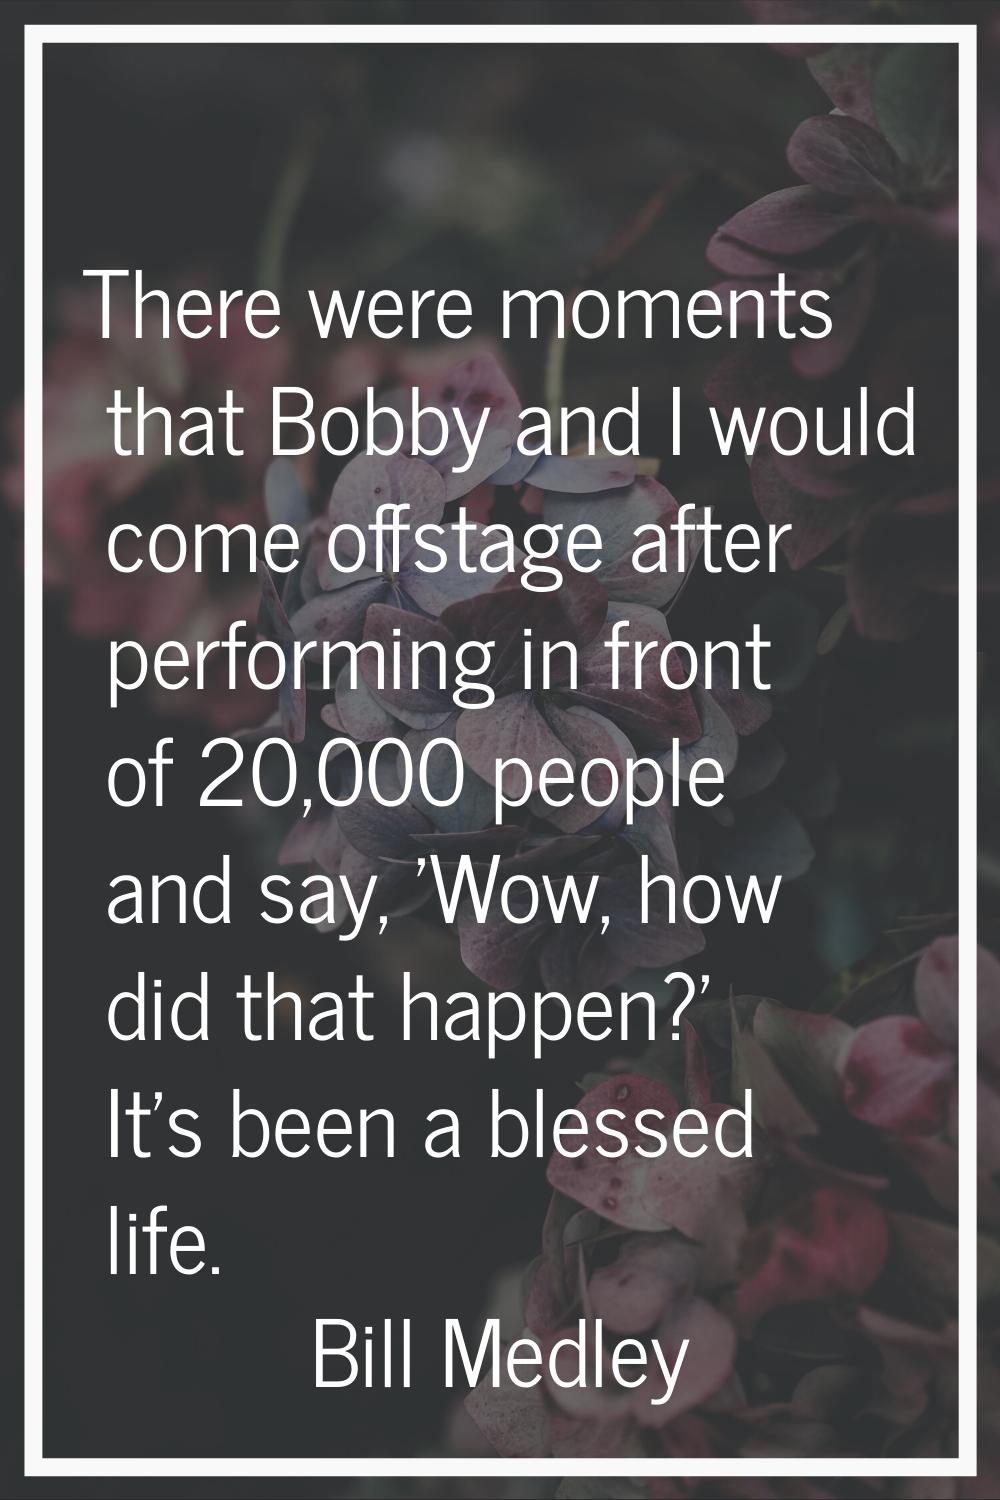 There were moments that Bobby and I would come offstage after performing in front of 20,000 people 